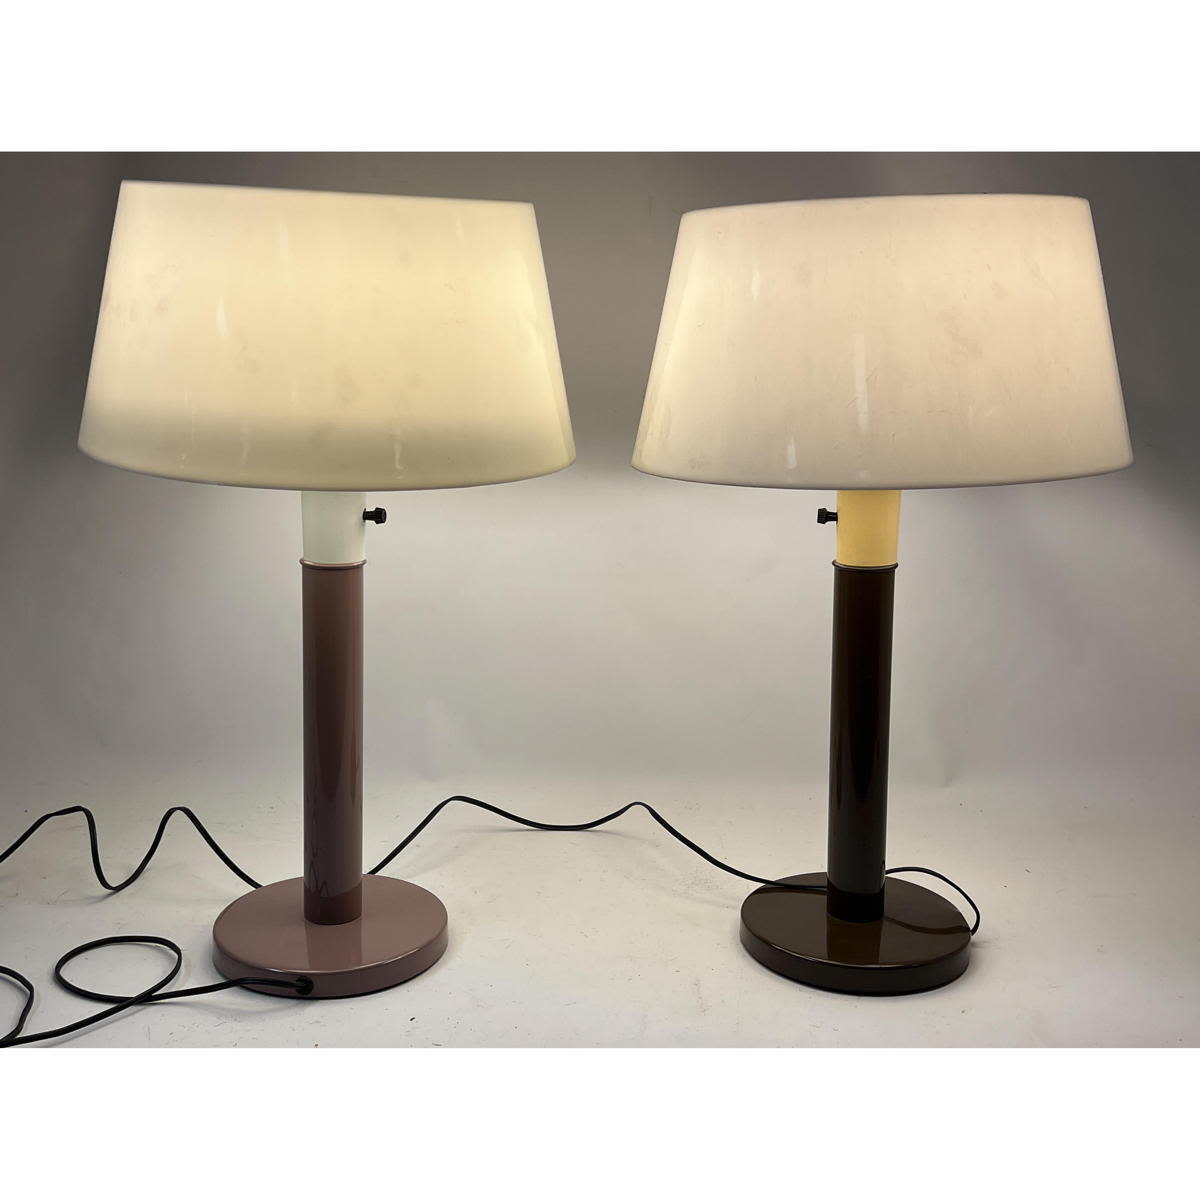 2pc Modernist Table Lamps One 2a781f